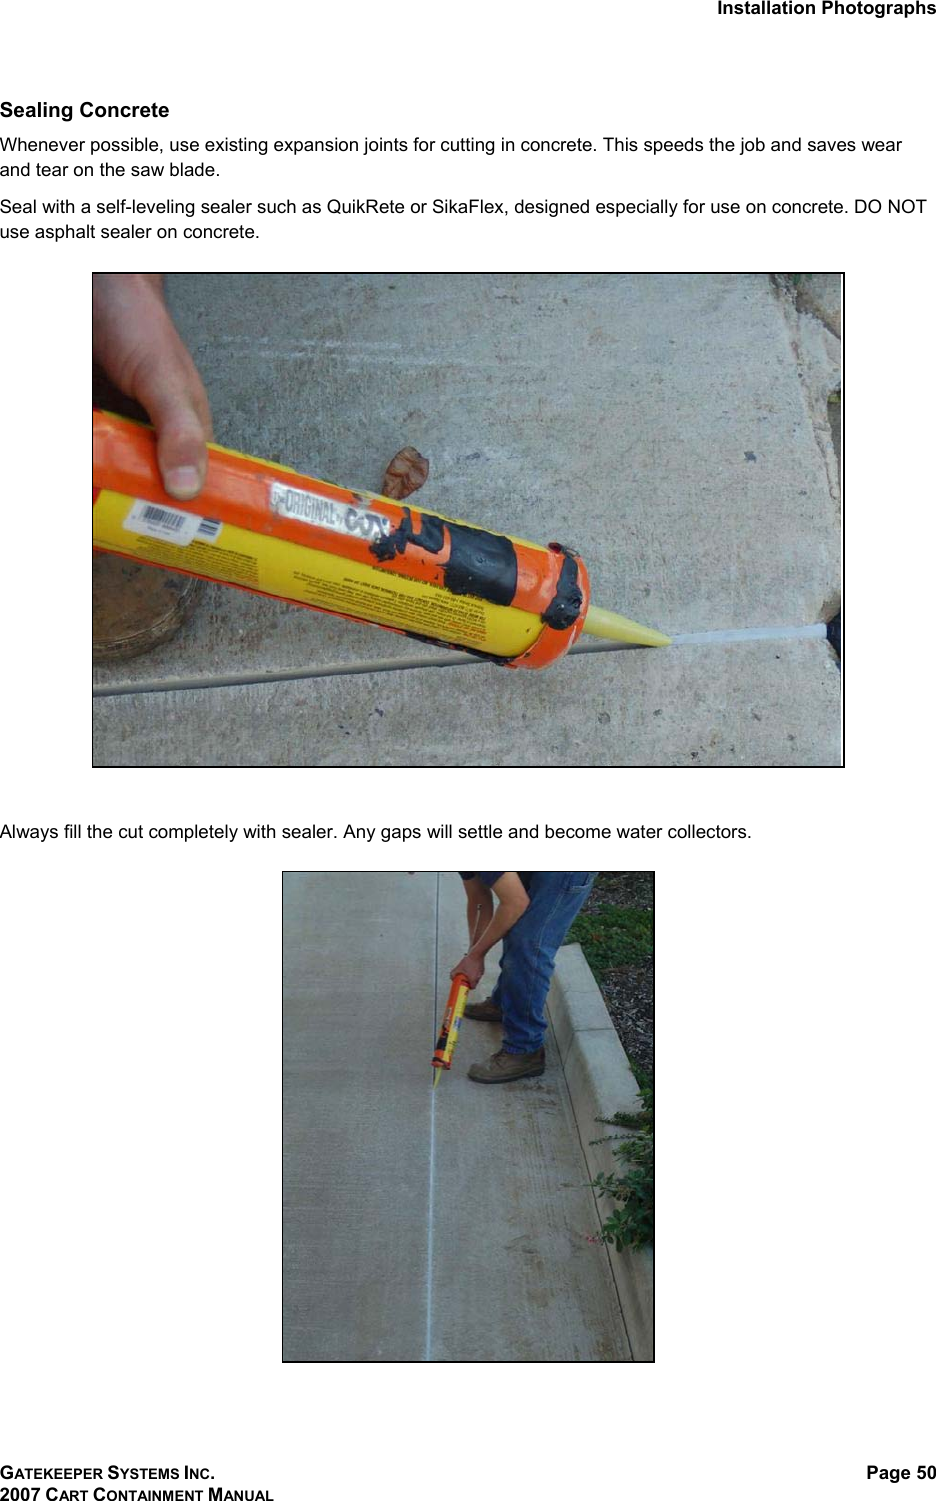 Installation Photographs GATEKEEPER SYSTEMS INC. 2007 CART CONTAINMENT MANUAL Page 50  Sealing Concrete  Whenever possible, use existing expansion joints for cutting in concrete. This speeds the job and saves wear and tear on the saw blade.  Seal with a self-leveling sealer such as QuikRete or SikaFlex, designed especially for use on concrete. DO NOT use asphalt sealer on concrete.     Always fill the cut completely with sealer. Any gaps will settle and become water collectors.    